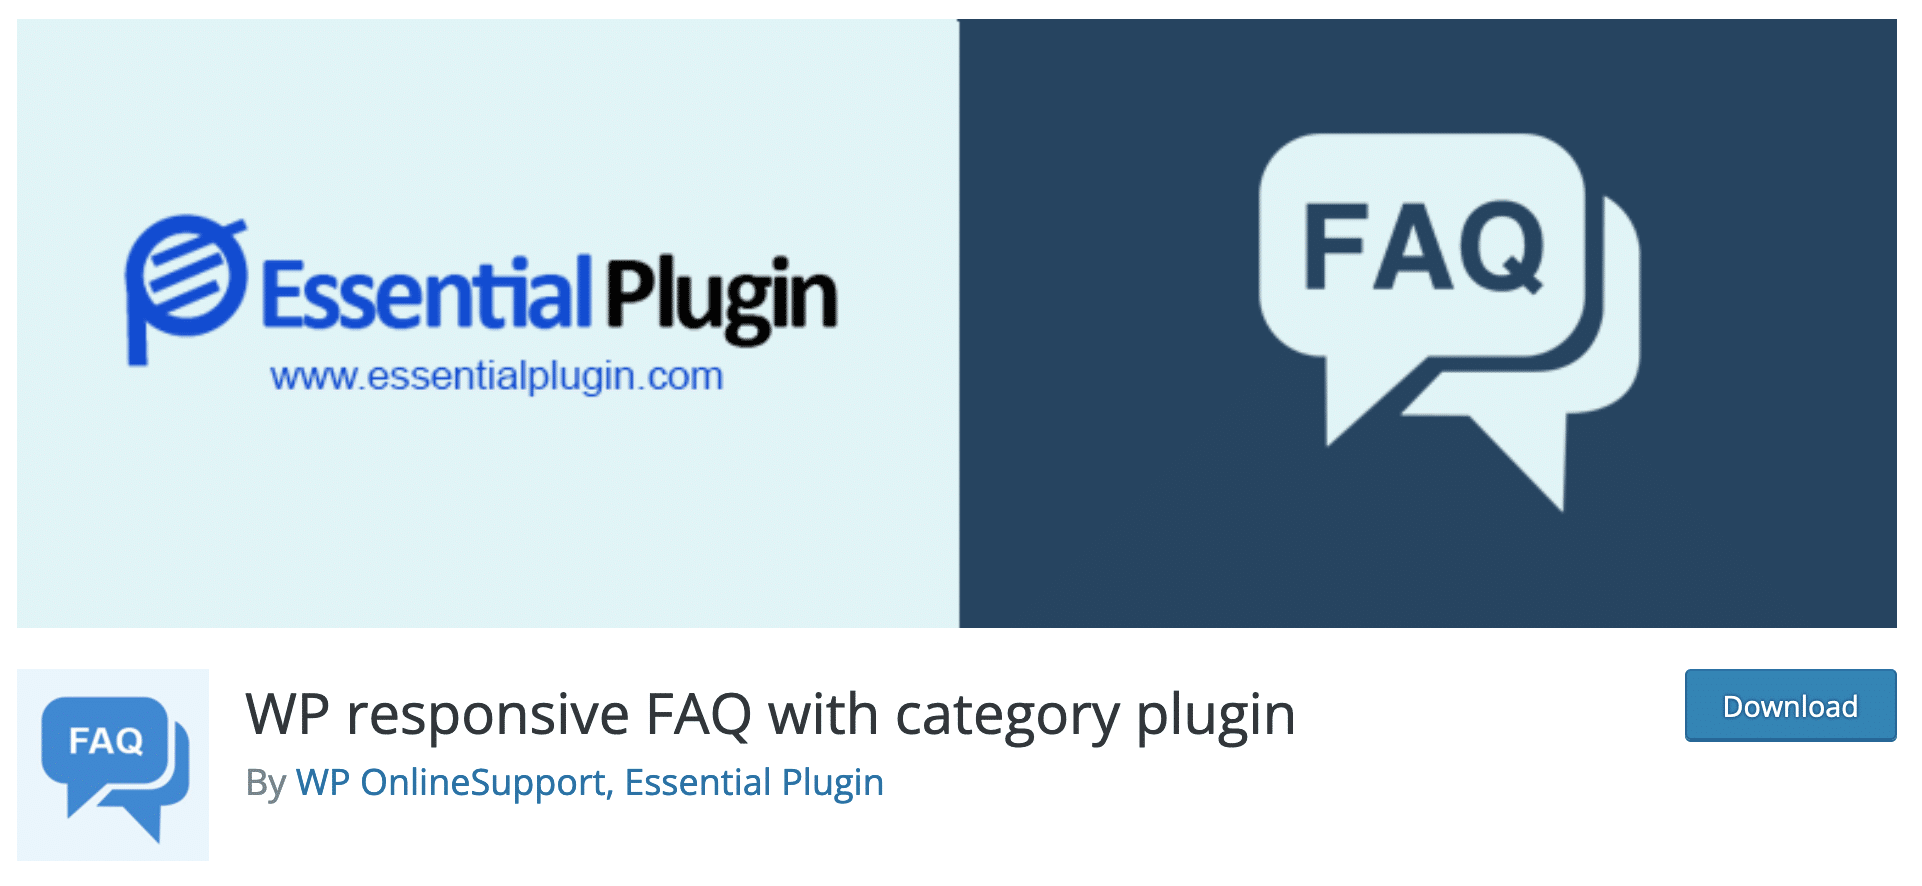 WP responsive FAQ with category plugin download page.